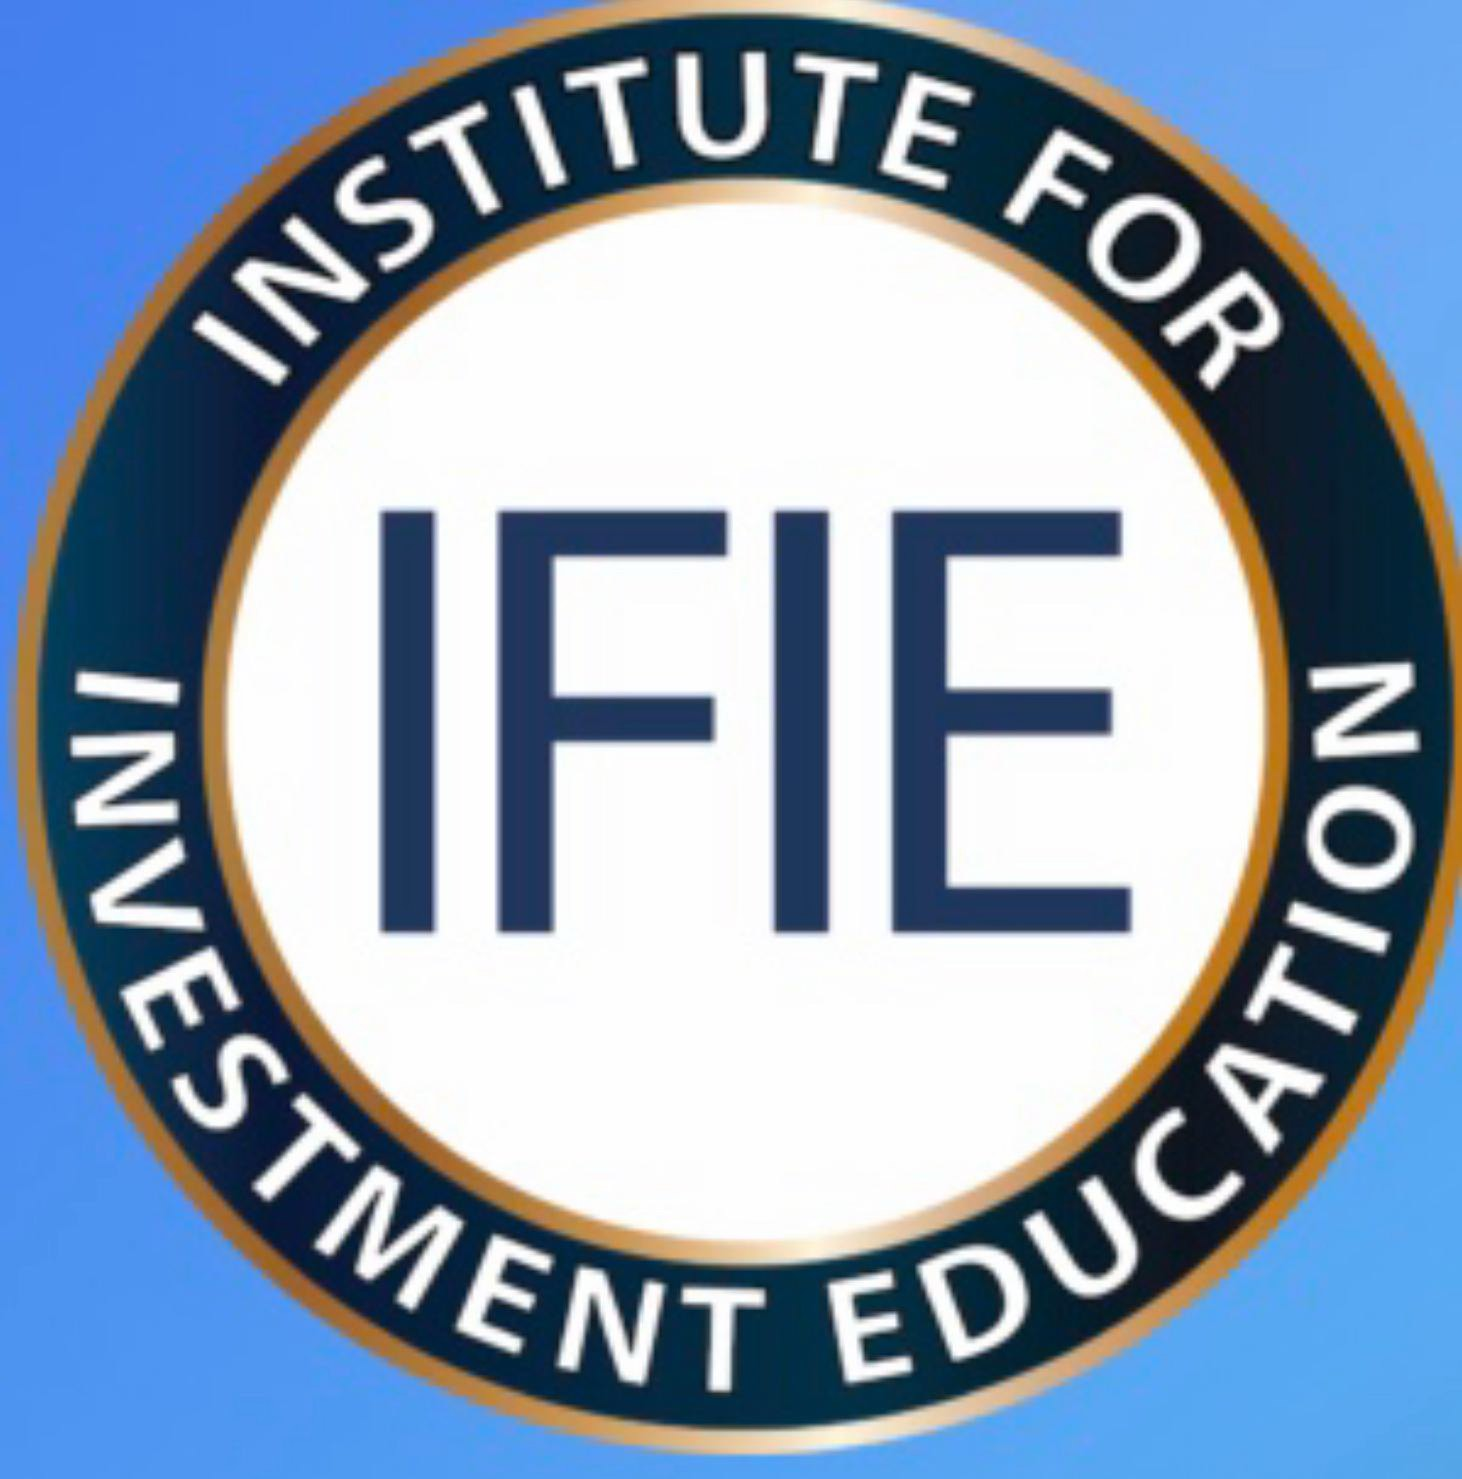  INSTITUTE FOR INVESTMENT EDUCATION